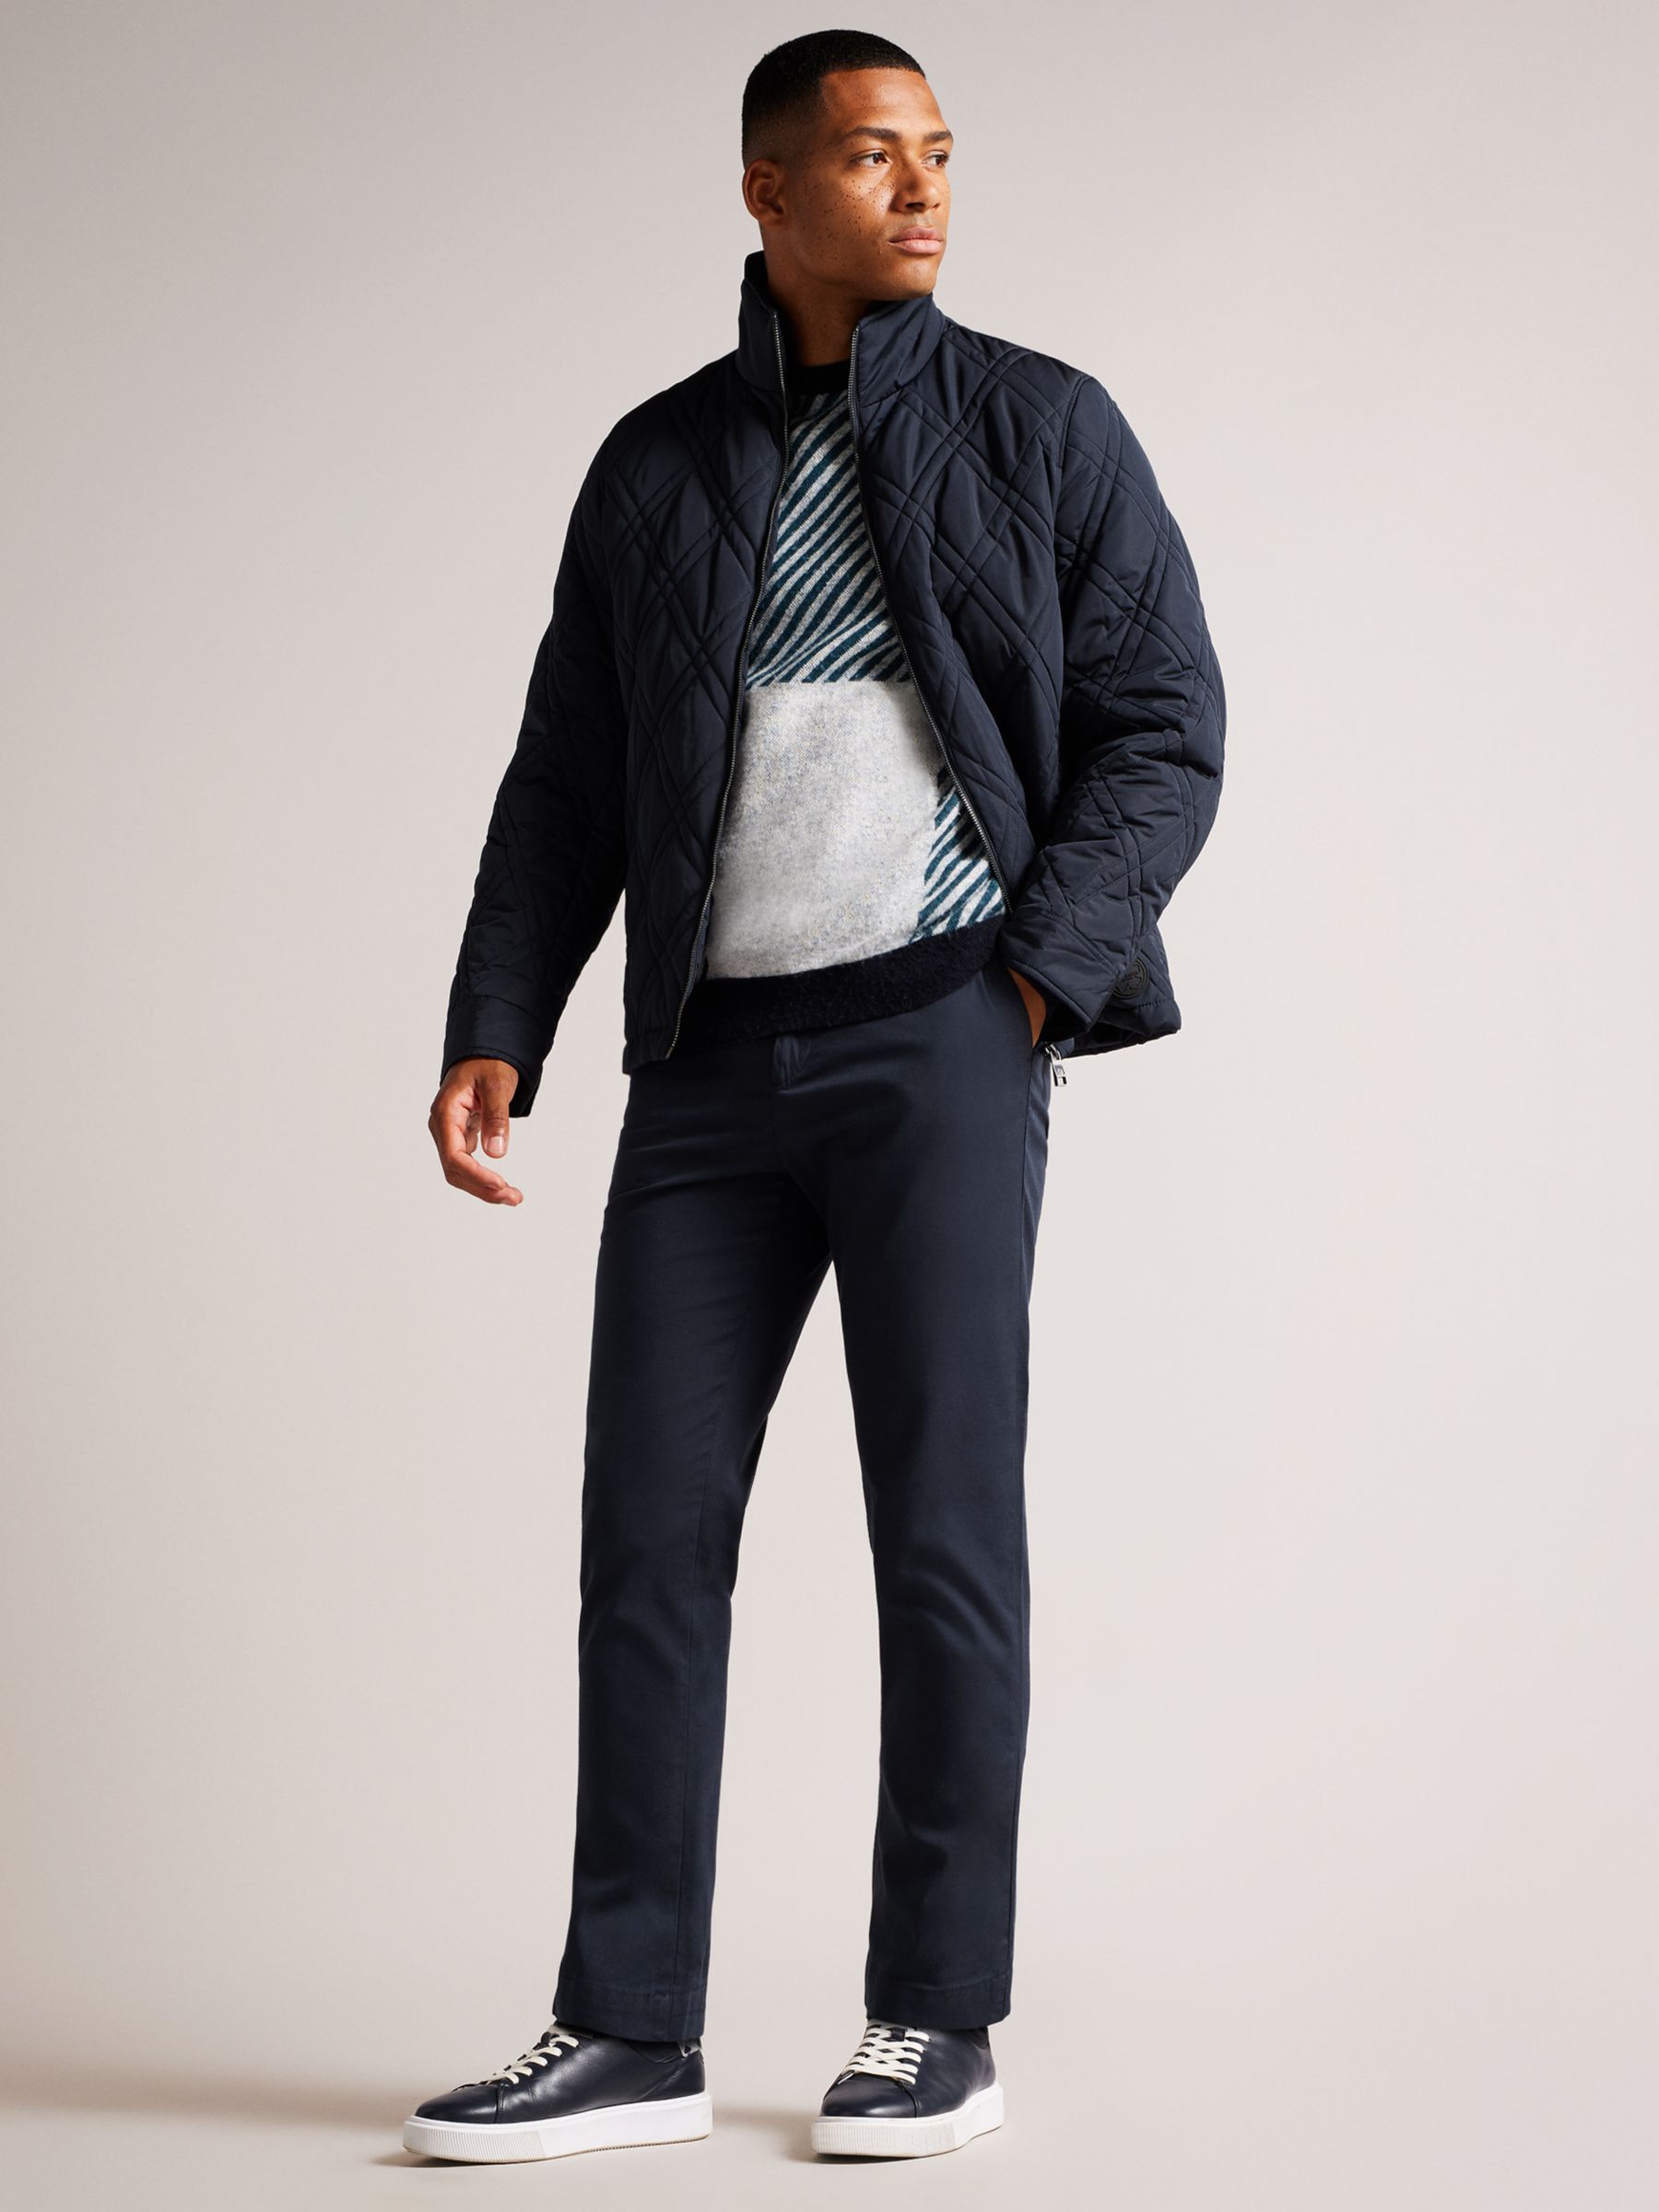 Ted Baker Manby Quilted Jacket, Navy at John Lewis & Partners